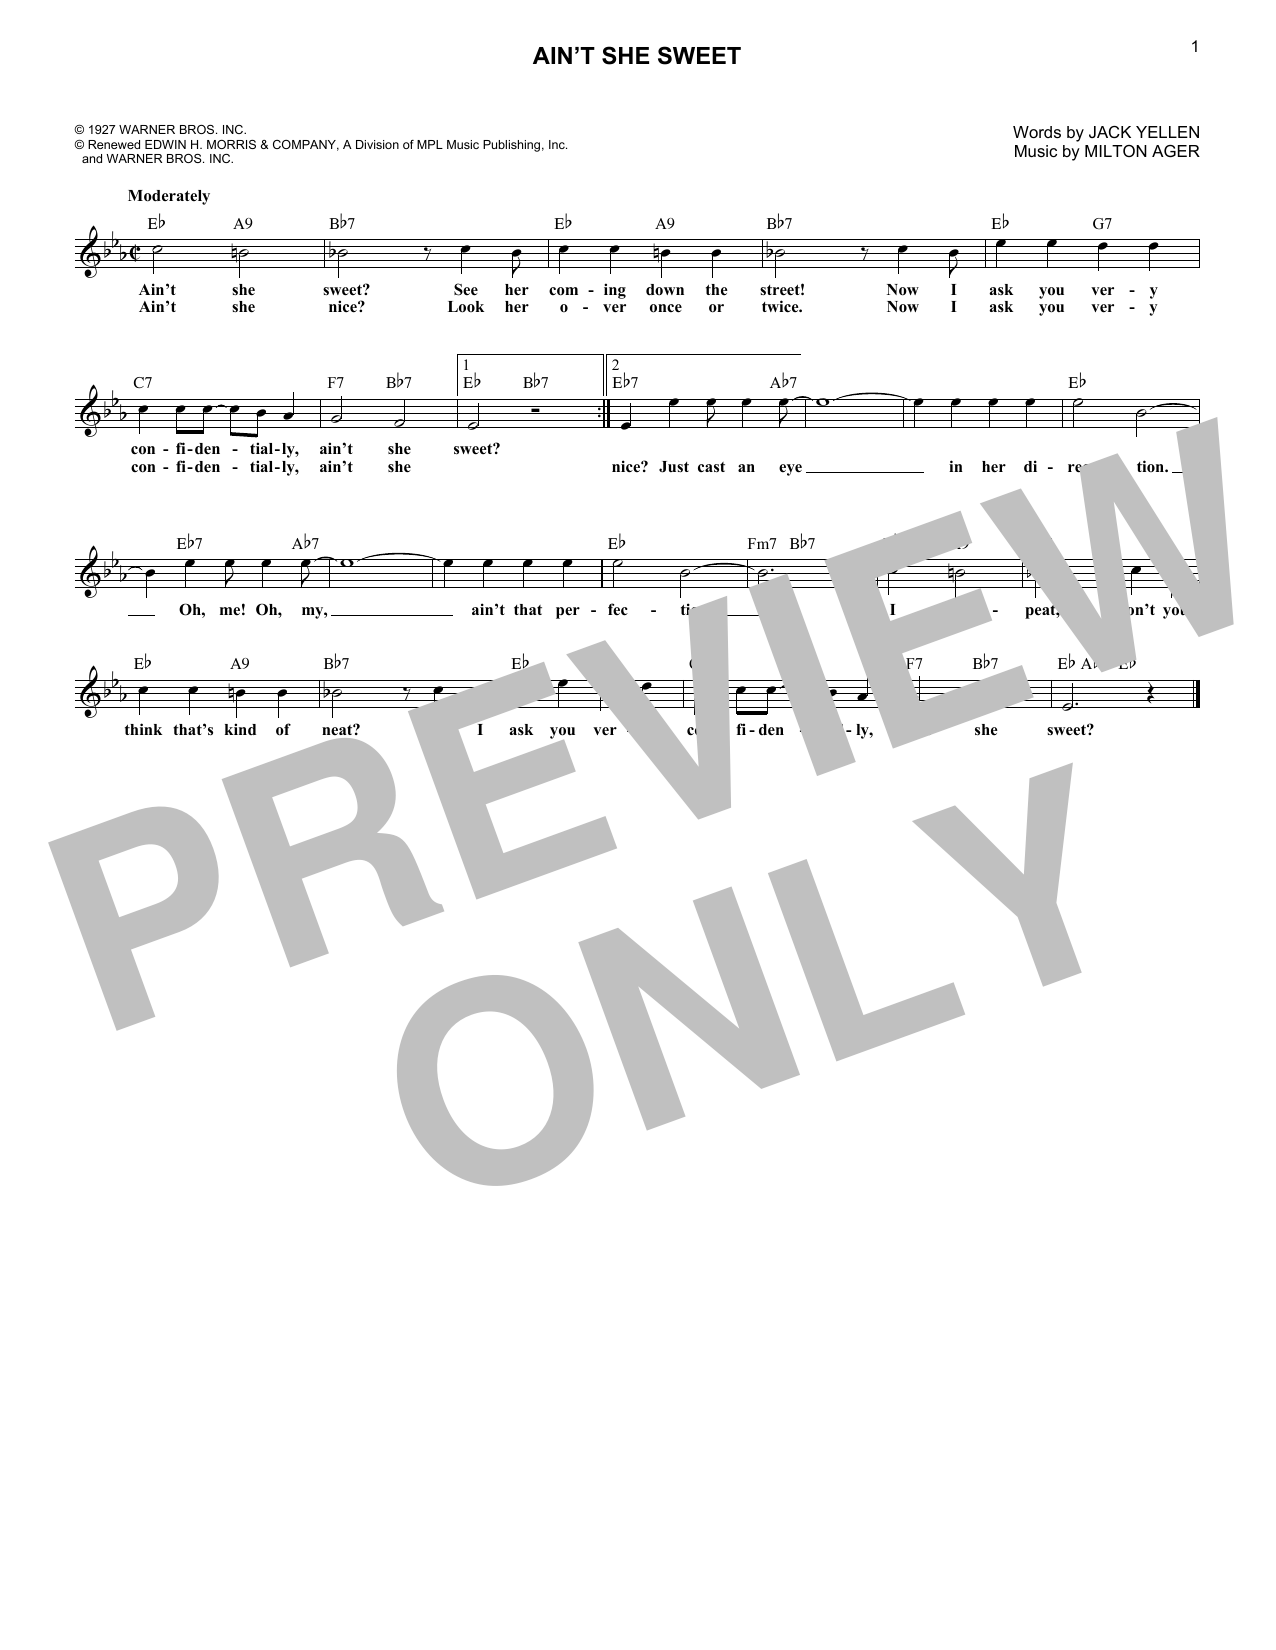 Download The Beatles Ain't She Sweet Sheet Music